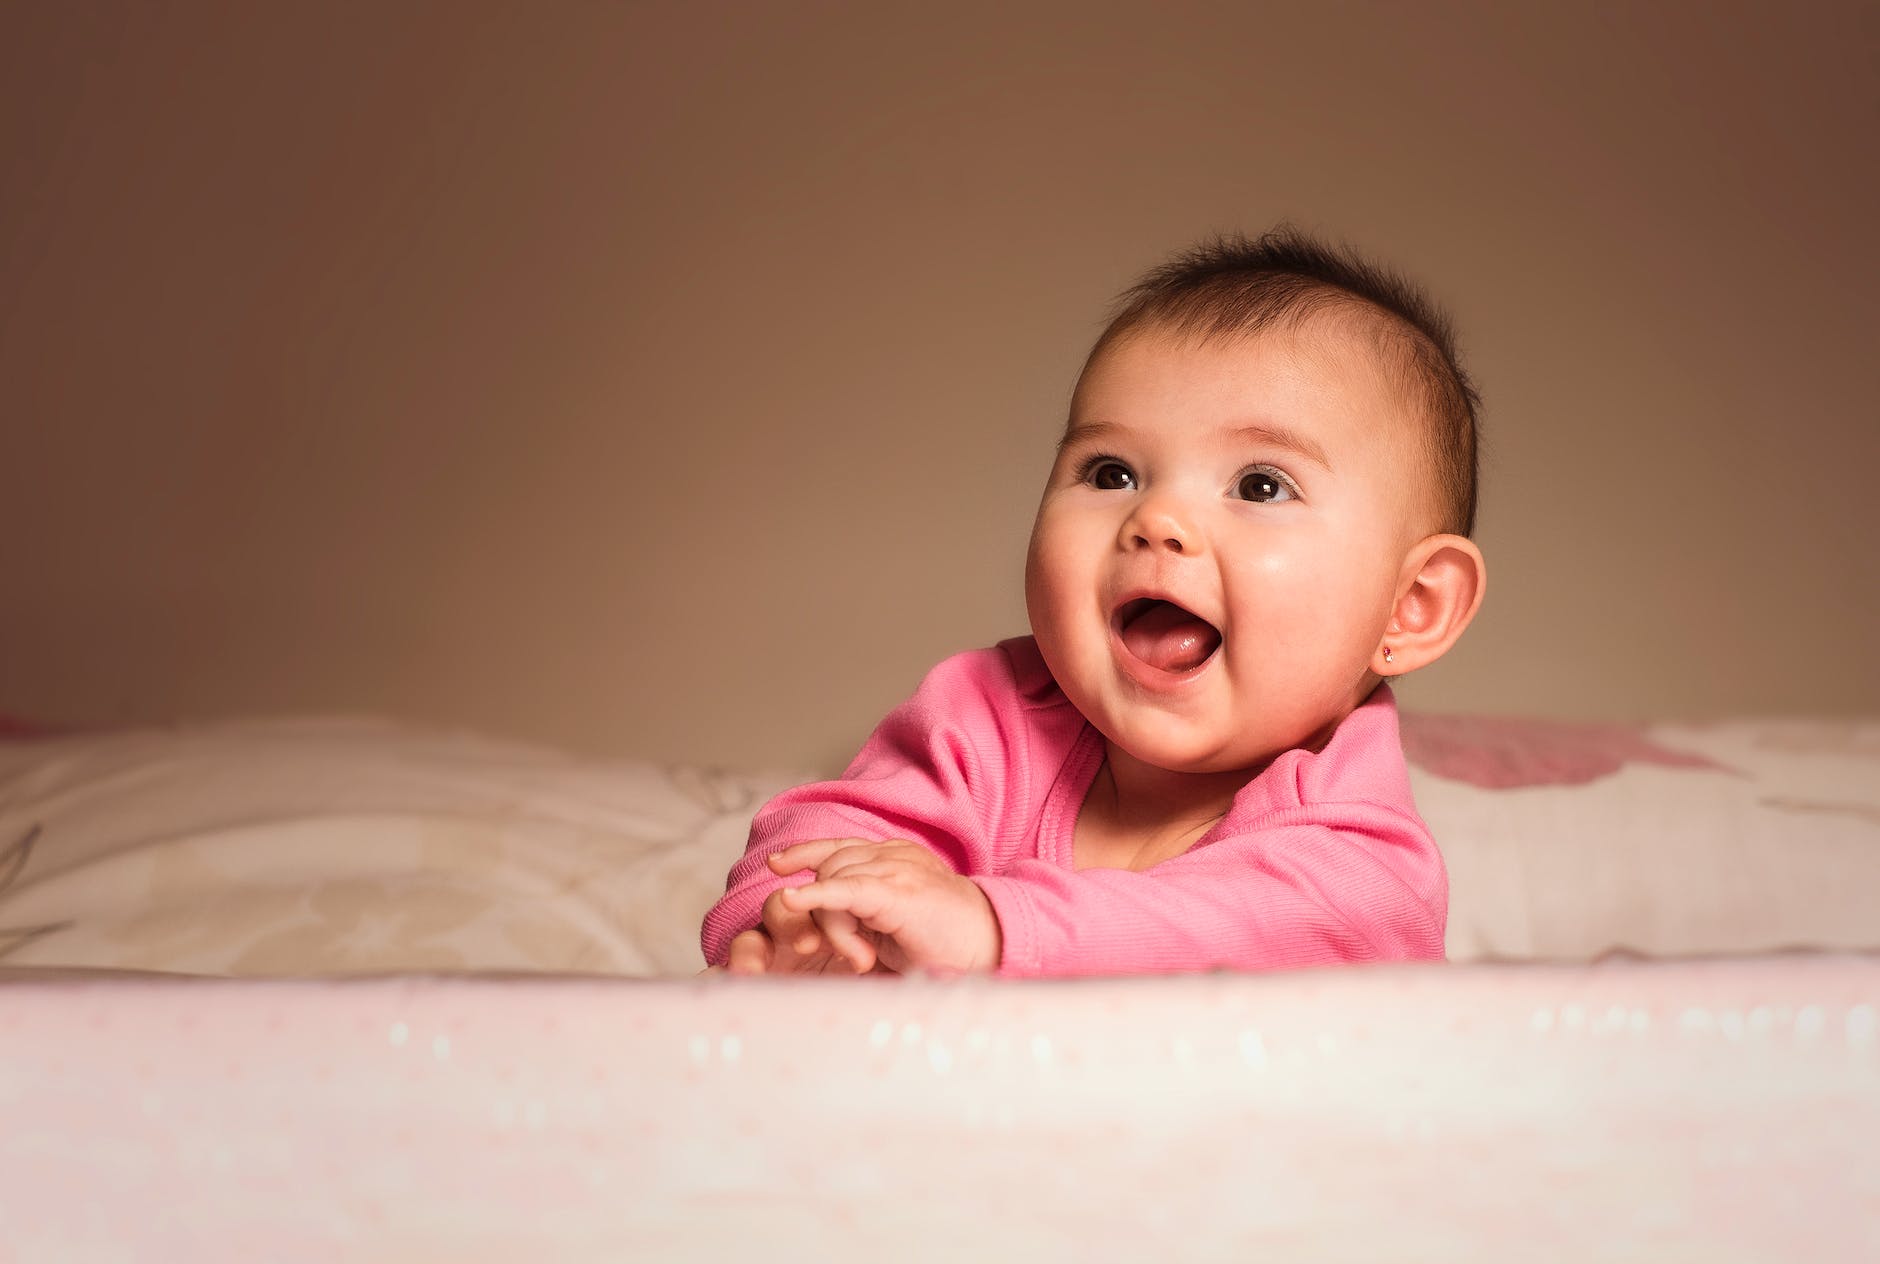 smiling baby lying on bed in room